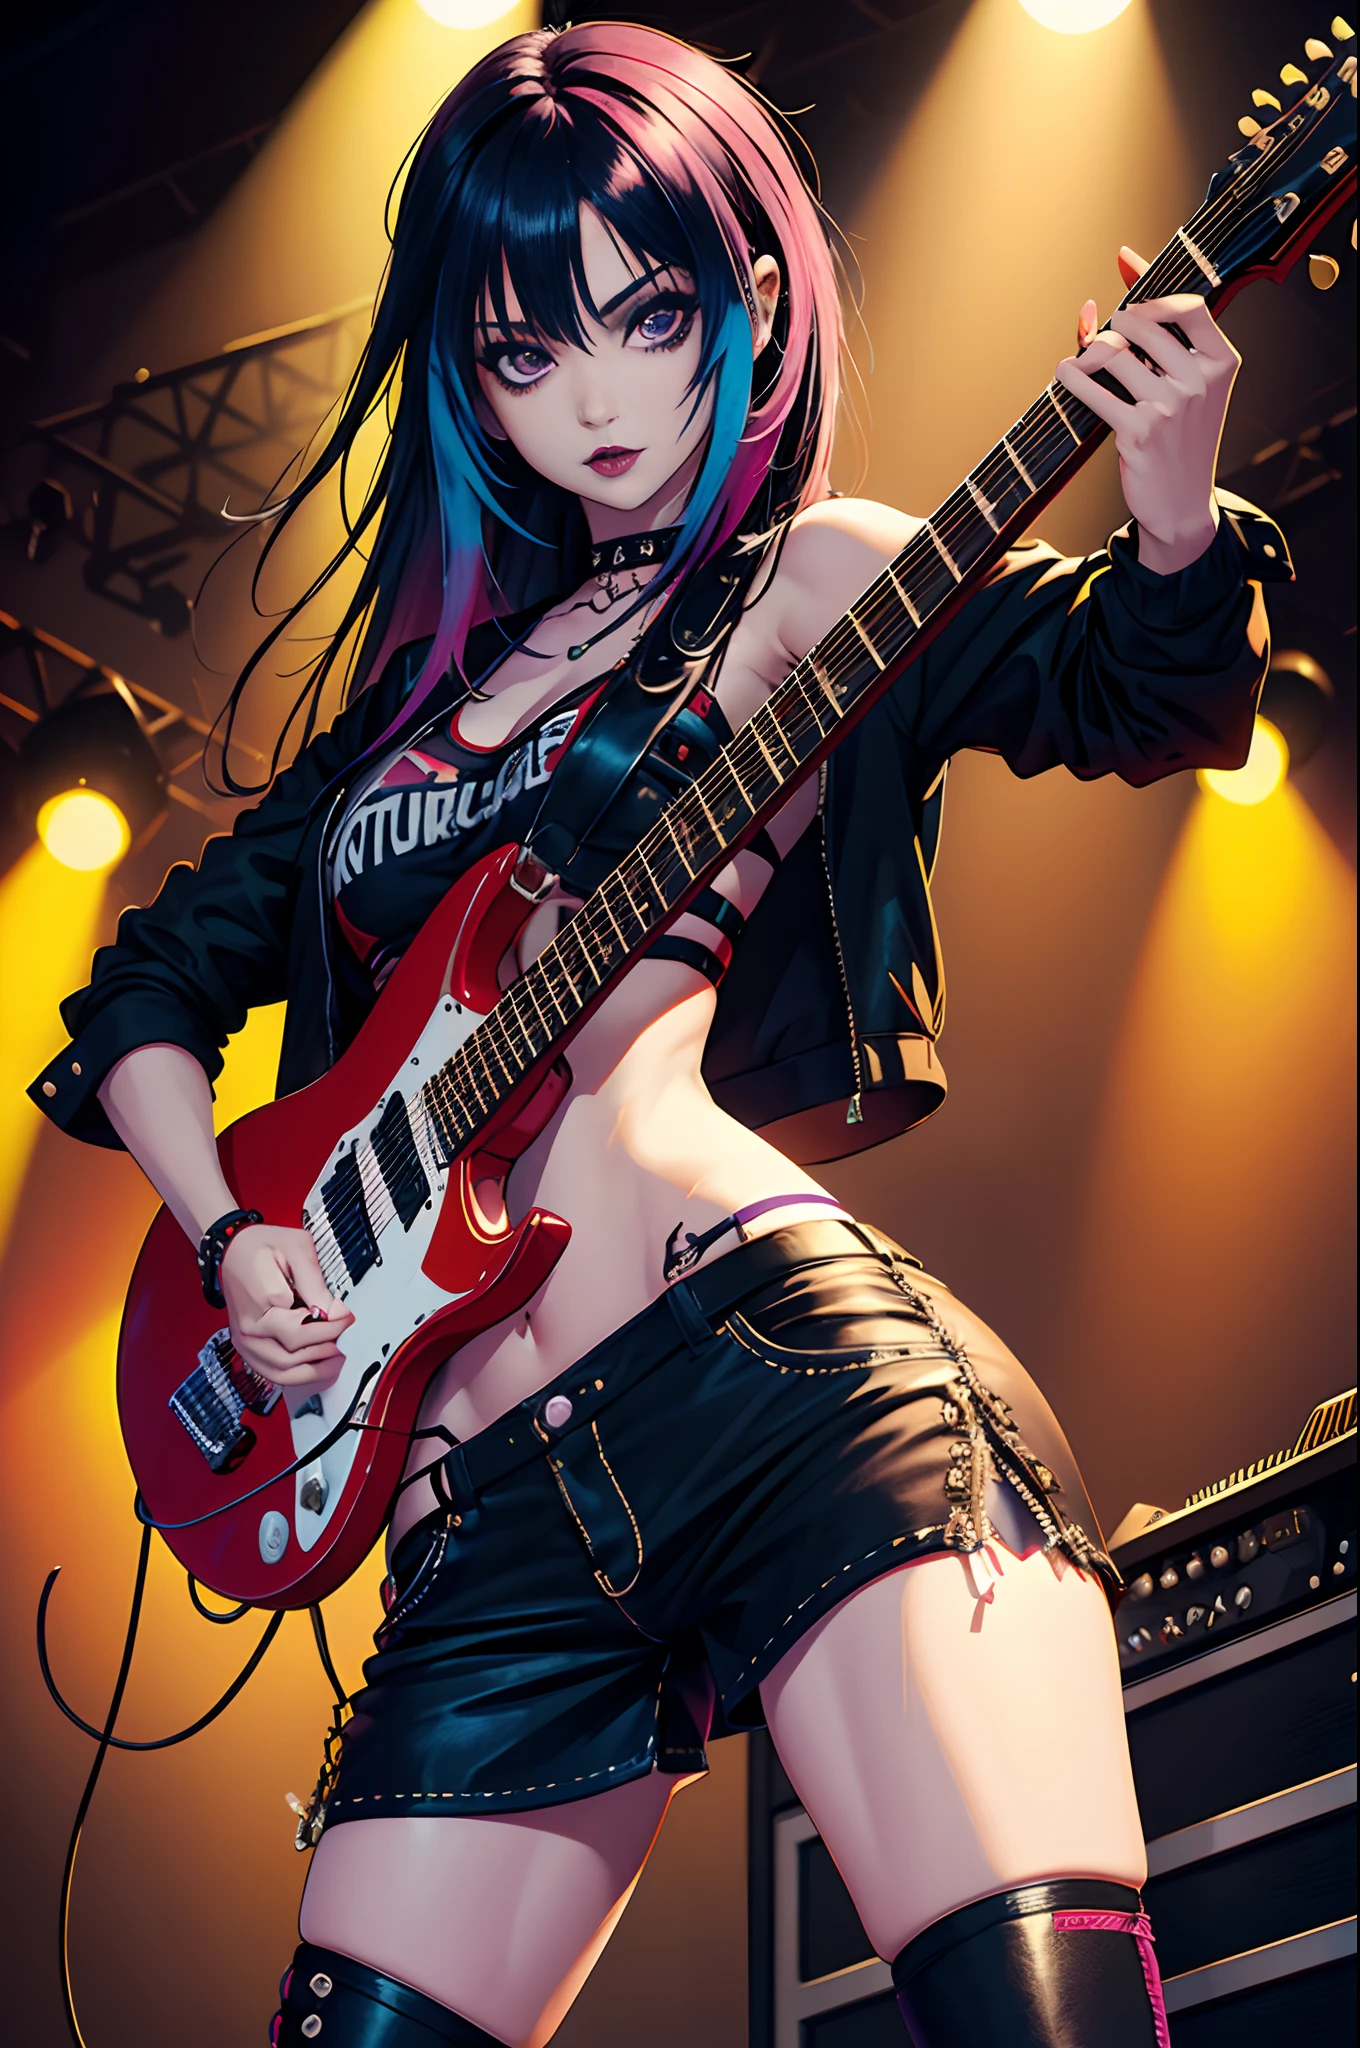 A rocker girl in a thong,portrait,illustration,Full body shot,electric guitar,avant-garde clothing,dark lipstick,spiky hair,muscular legs,confident expression,punk style,striking pose,dynamic  lighting,vibrant colors